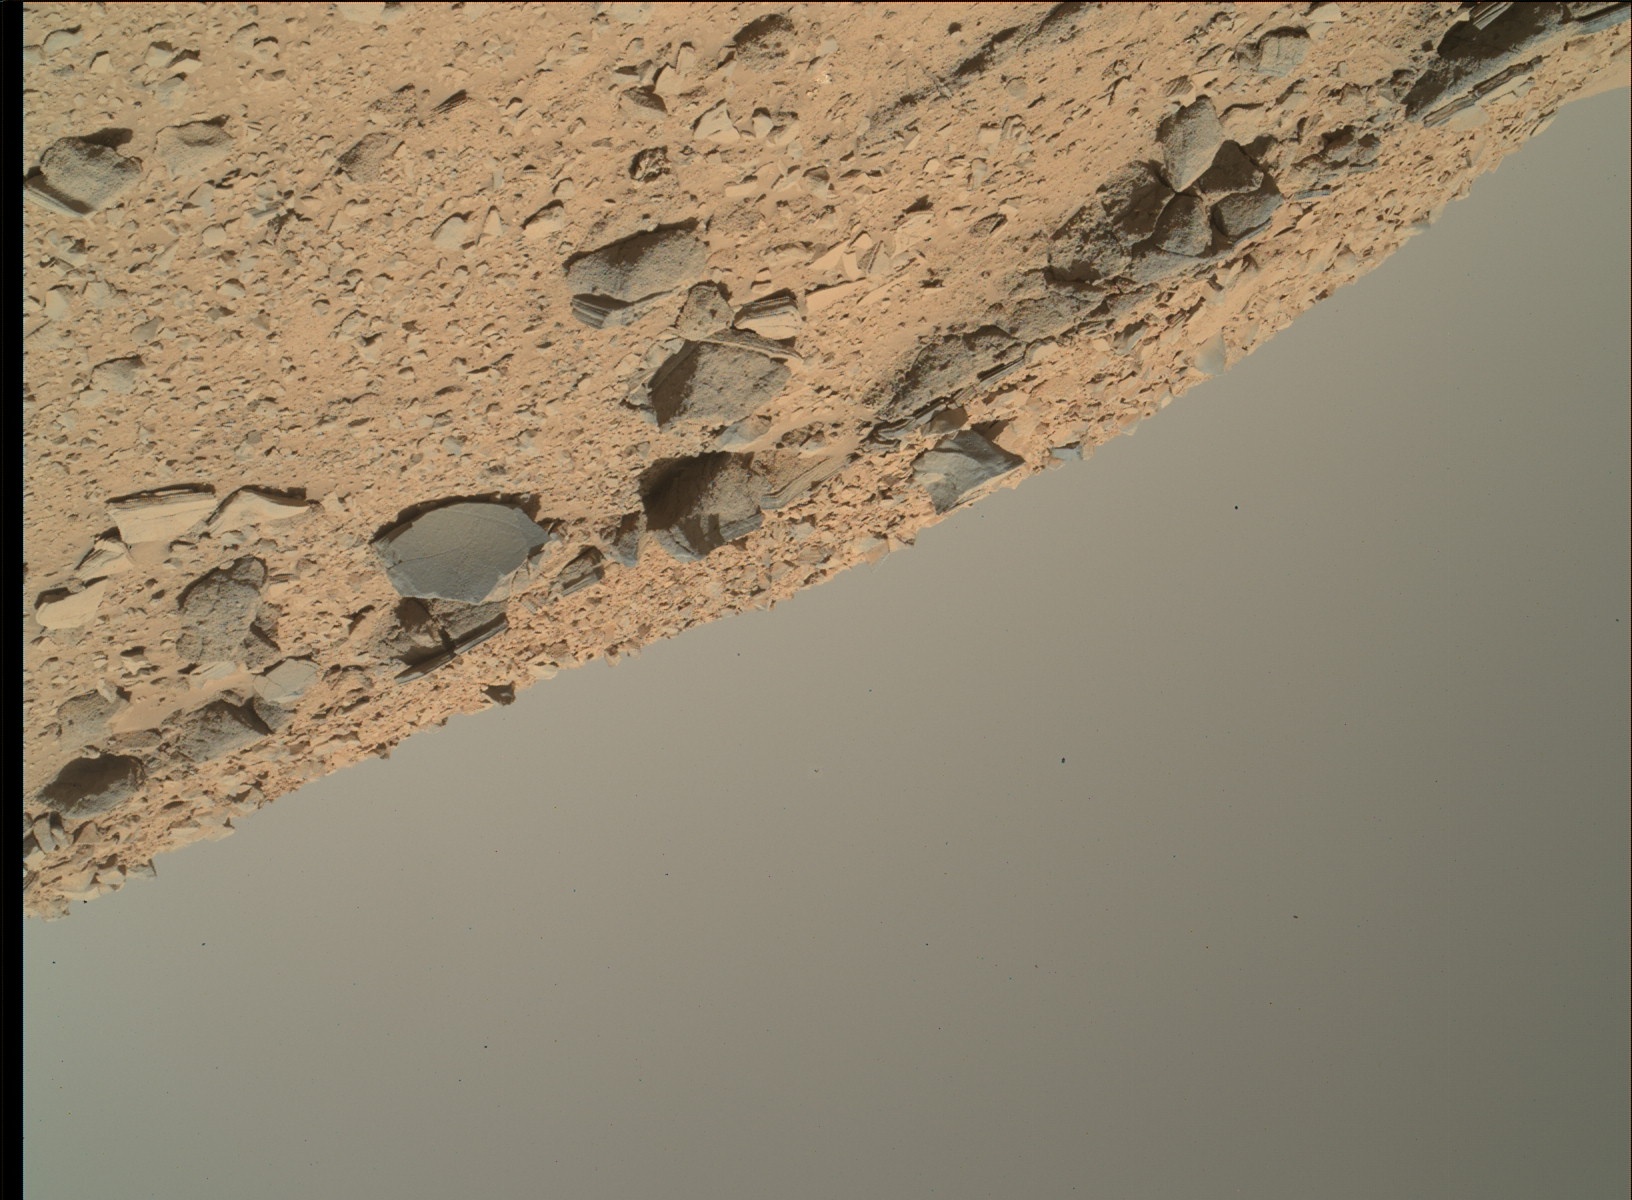 Nasa's Mars rover Curiosity acquired this image using its Mars Hand Lens Imager (MAHLI) on Sol 535